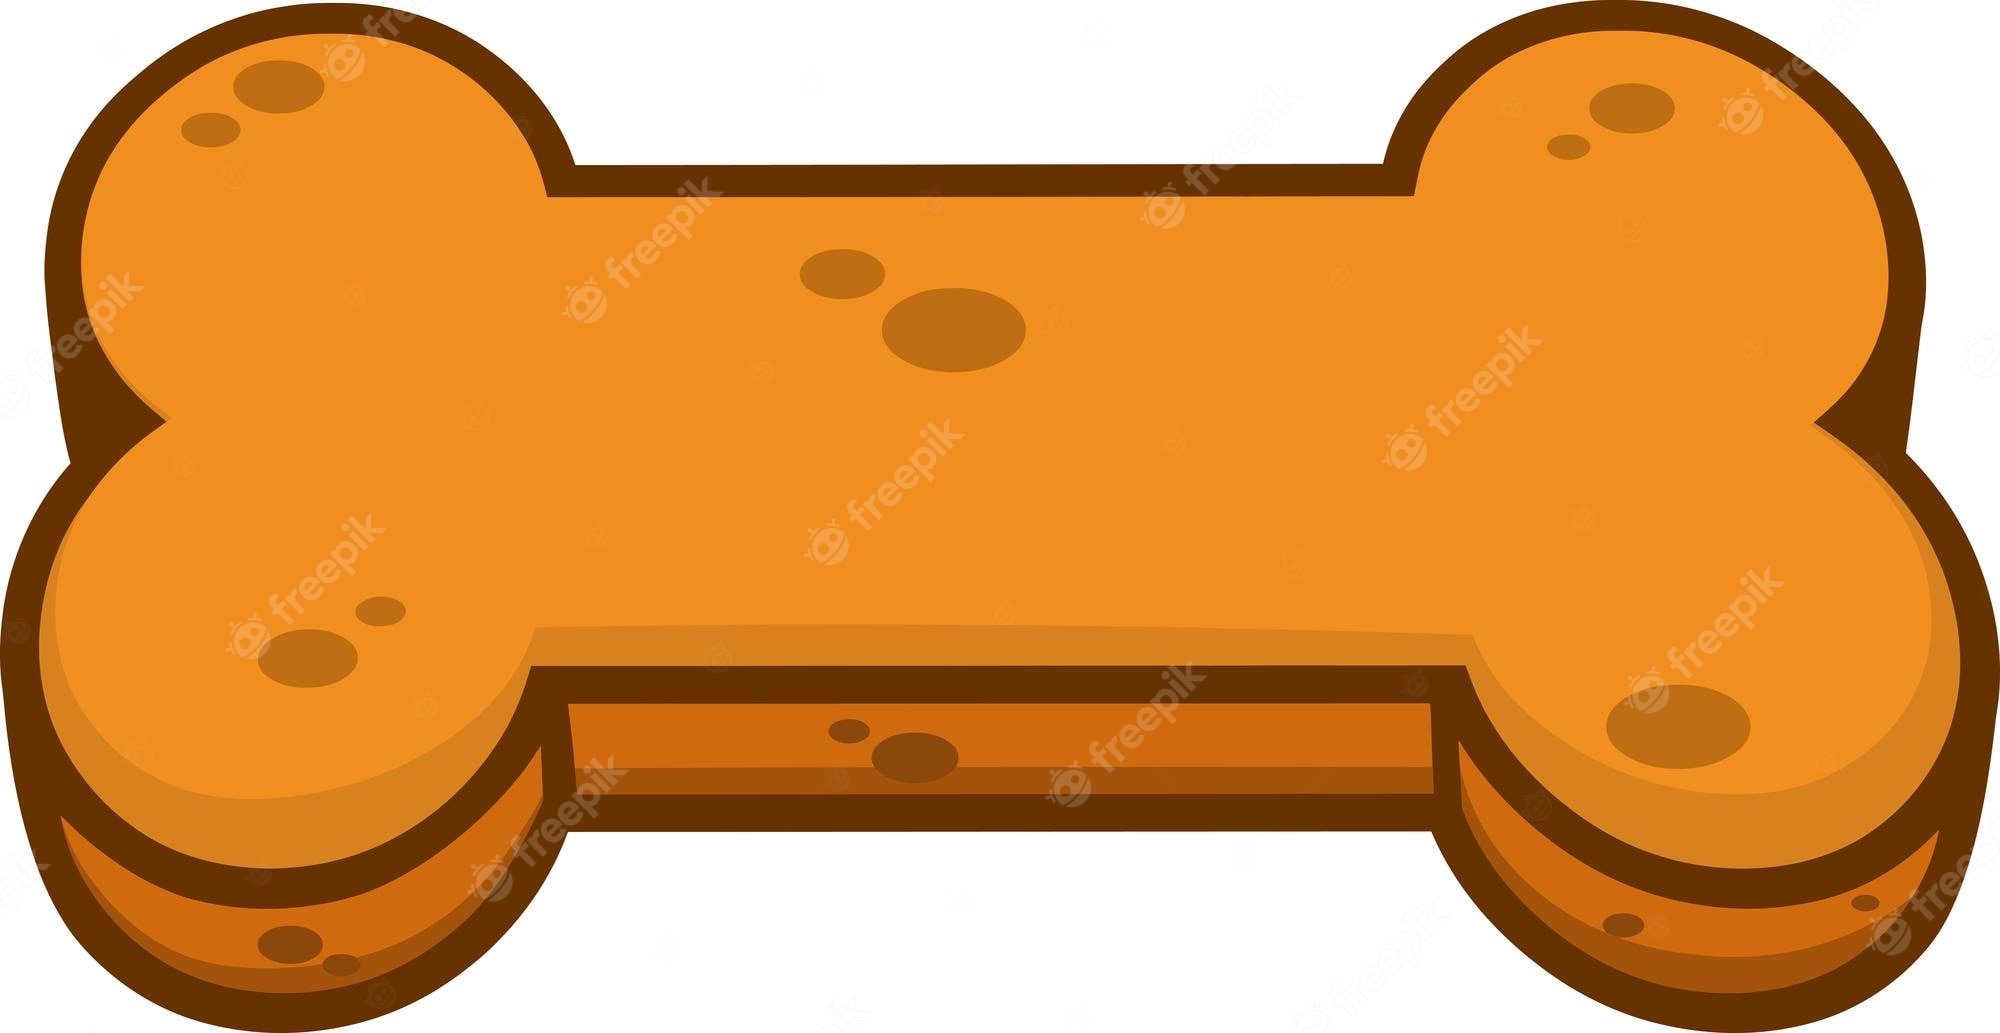 Dog Biscuit Cat Food Clip Art Snack, PNG, 800x600px, Dog, Biscuit ...